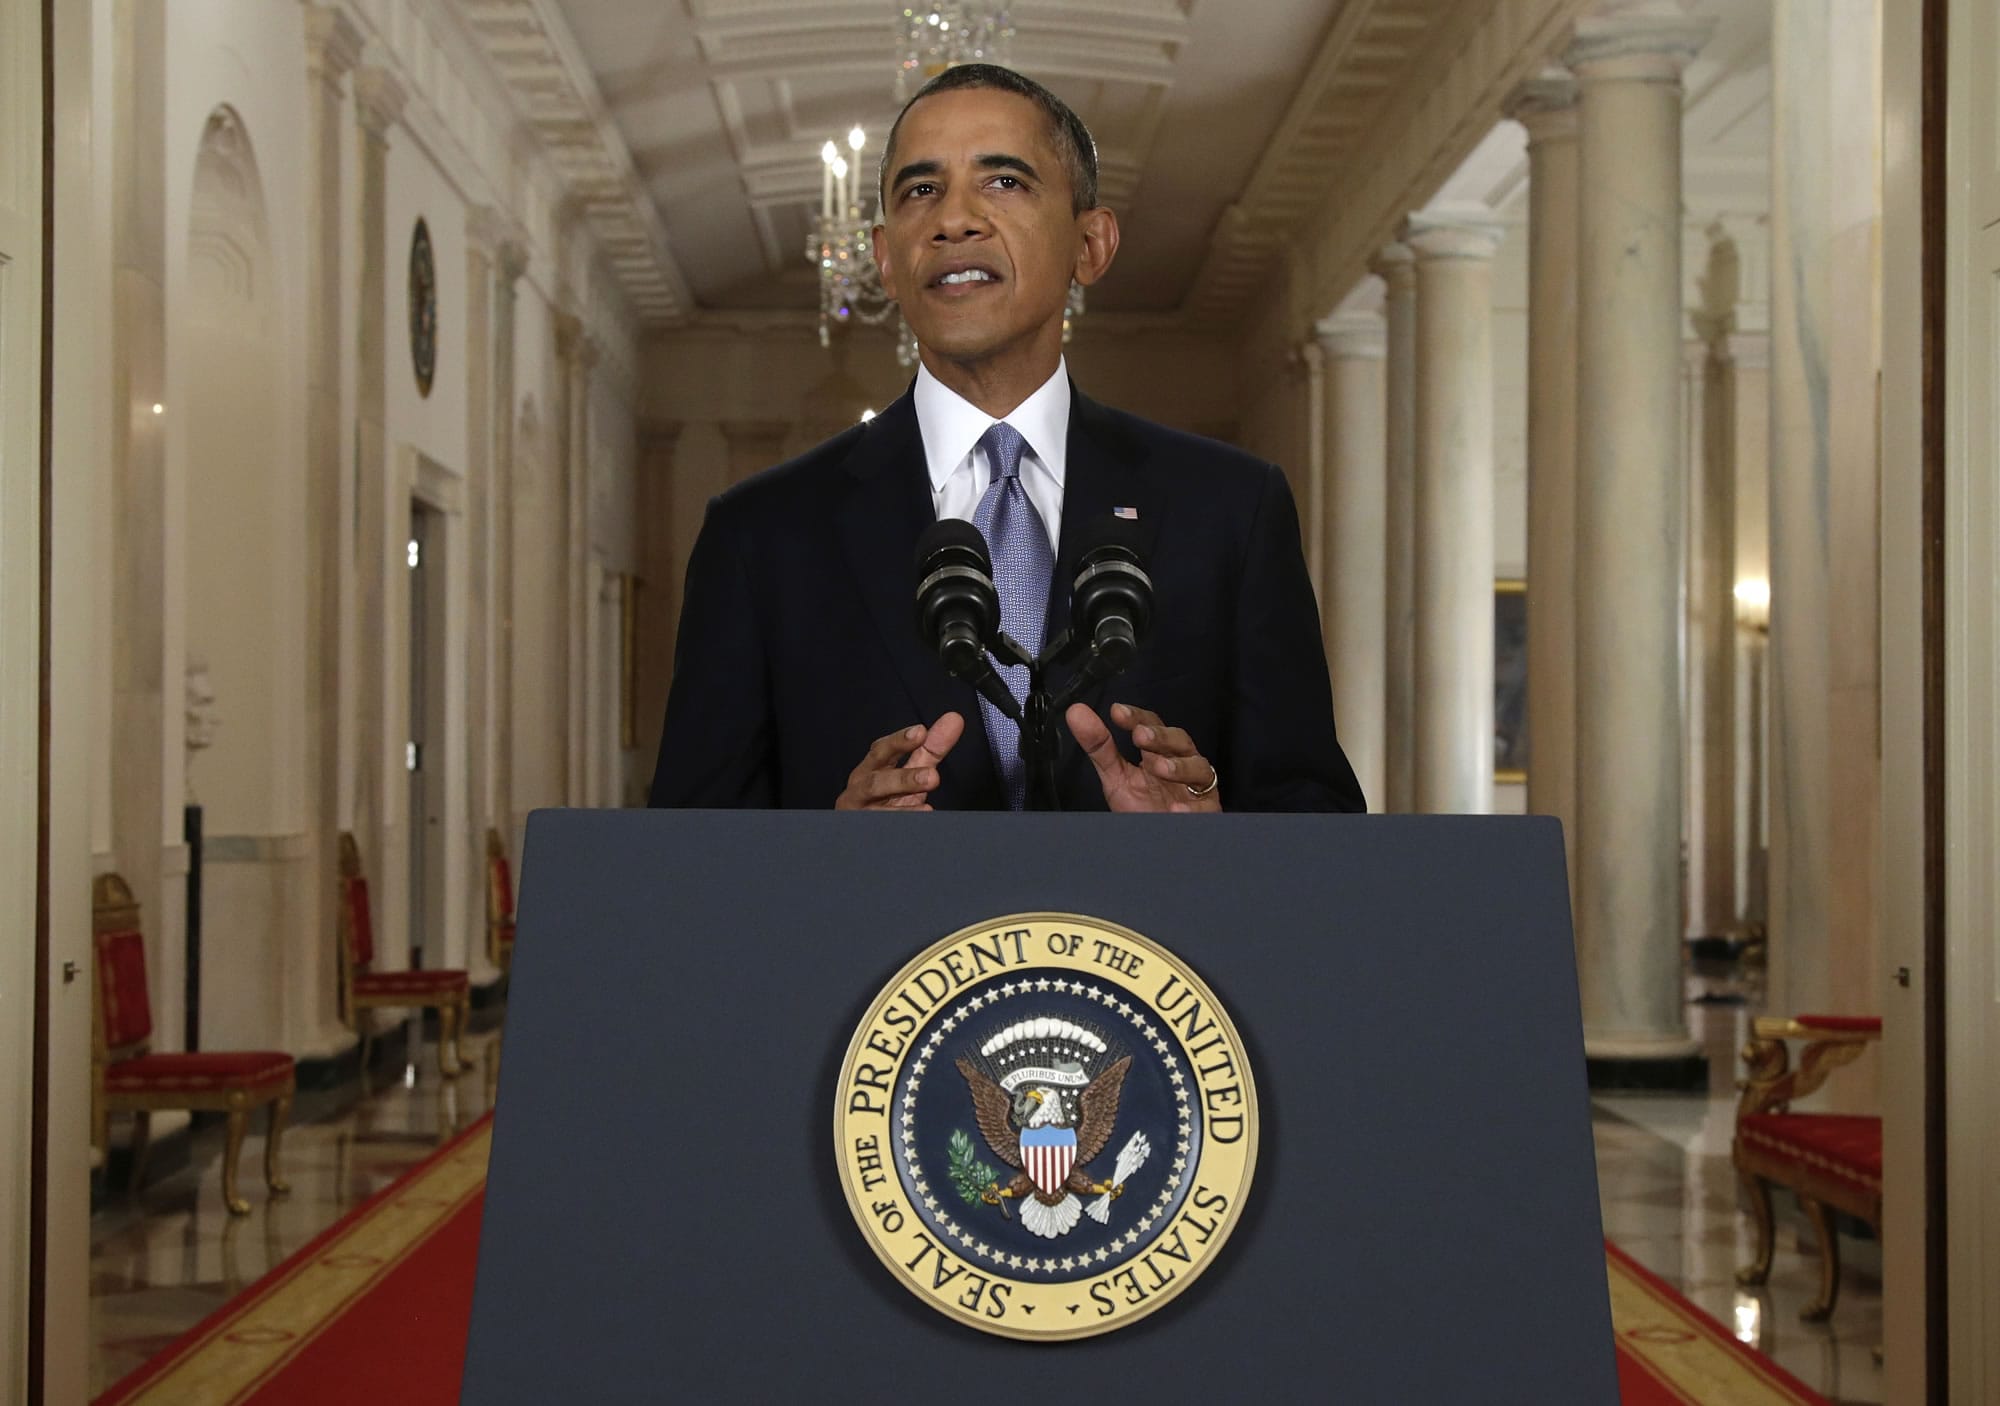 President Barack Obama addresses the nation in a live televised speech from the East Room of the White House in Washington, Tuesday, Sept. 10, 2013. President Obama blended the threat of military action with the hope of a diplomatic solution as he works to strip Syria of its chemical weapons.